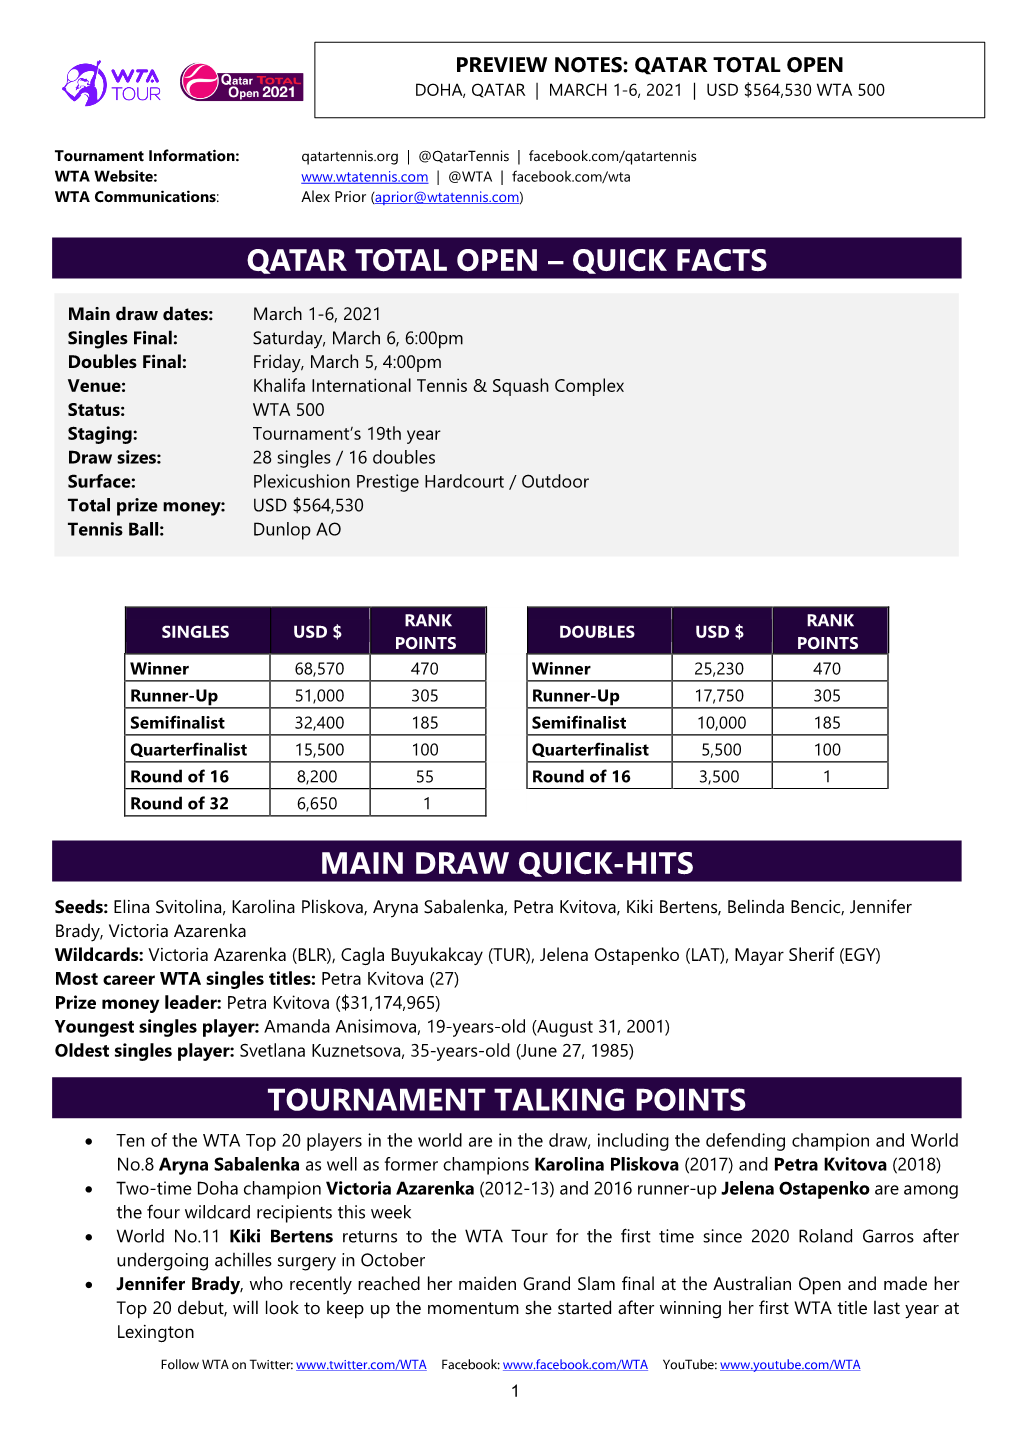 Qatar Total Open – Quick Facts Main Draw